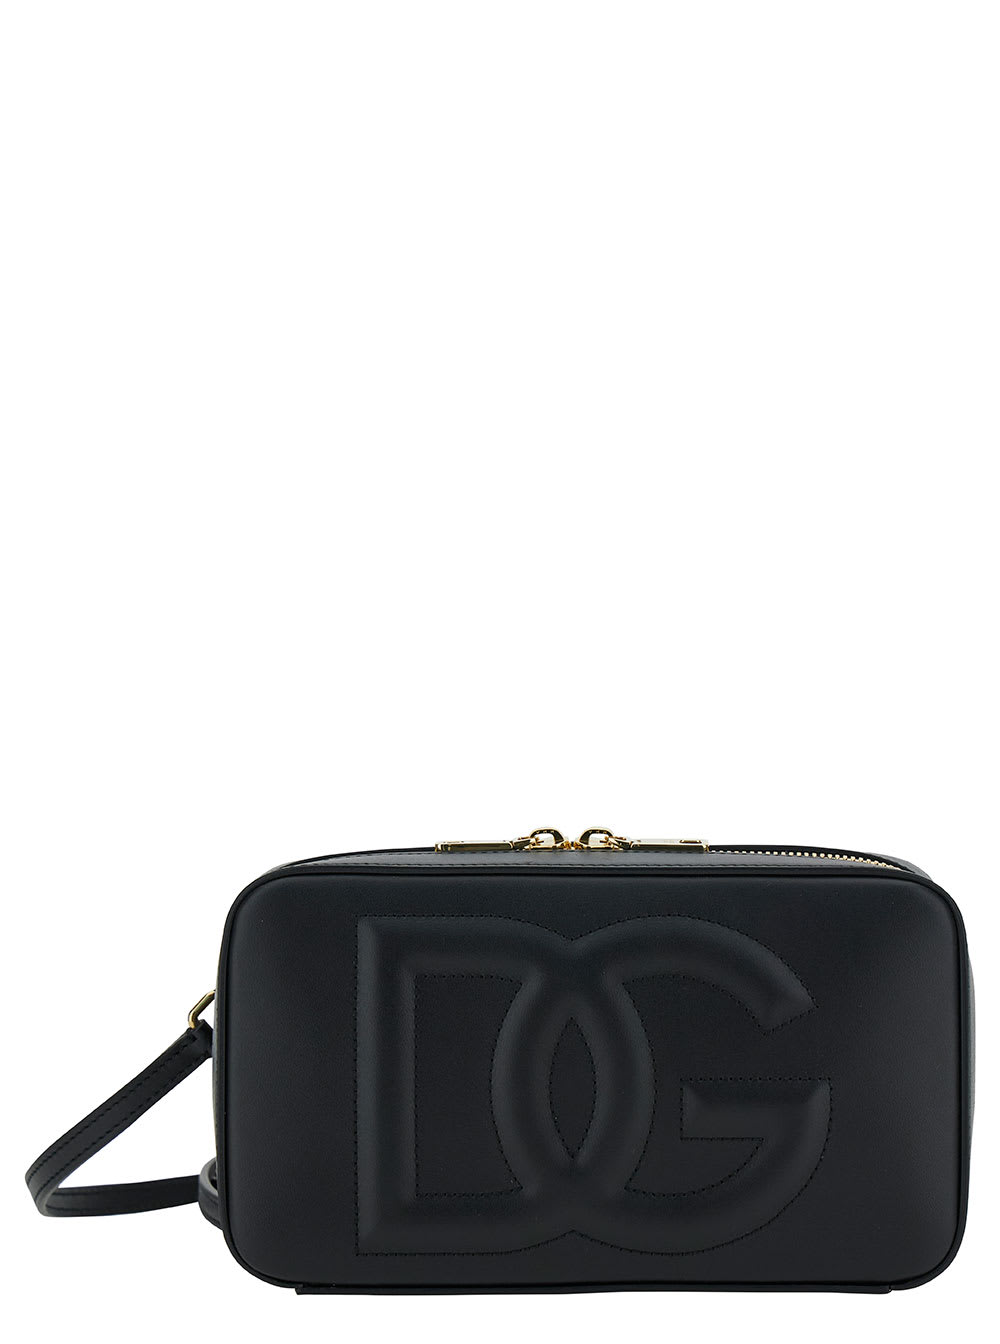 DOLCE & GABBANA BLACK CROSSBODY BAG WITH QUILTED DG LOGO IN LEATHER WOMAN